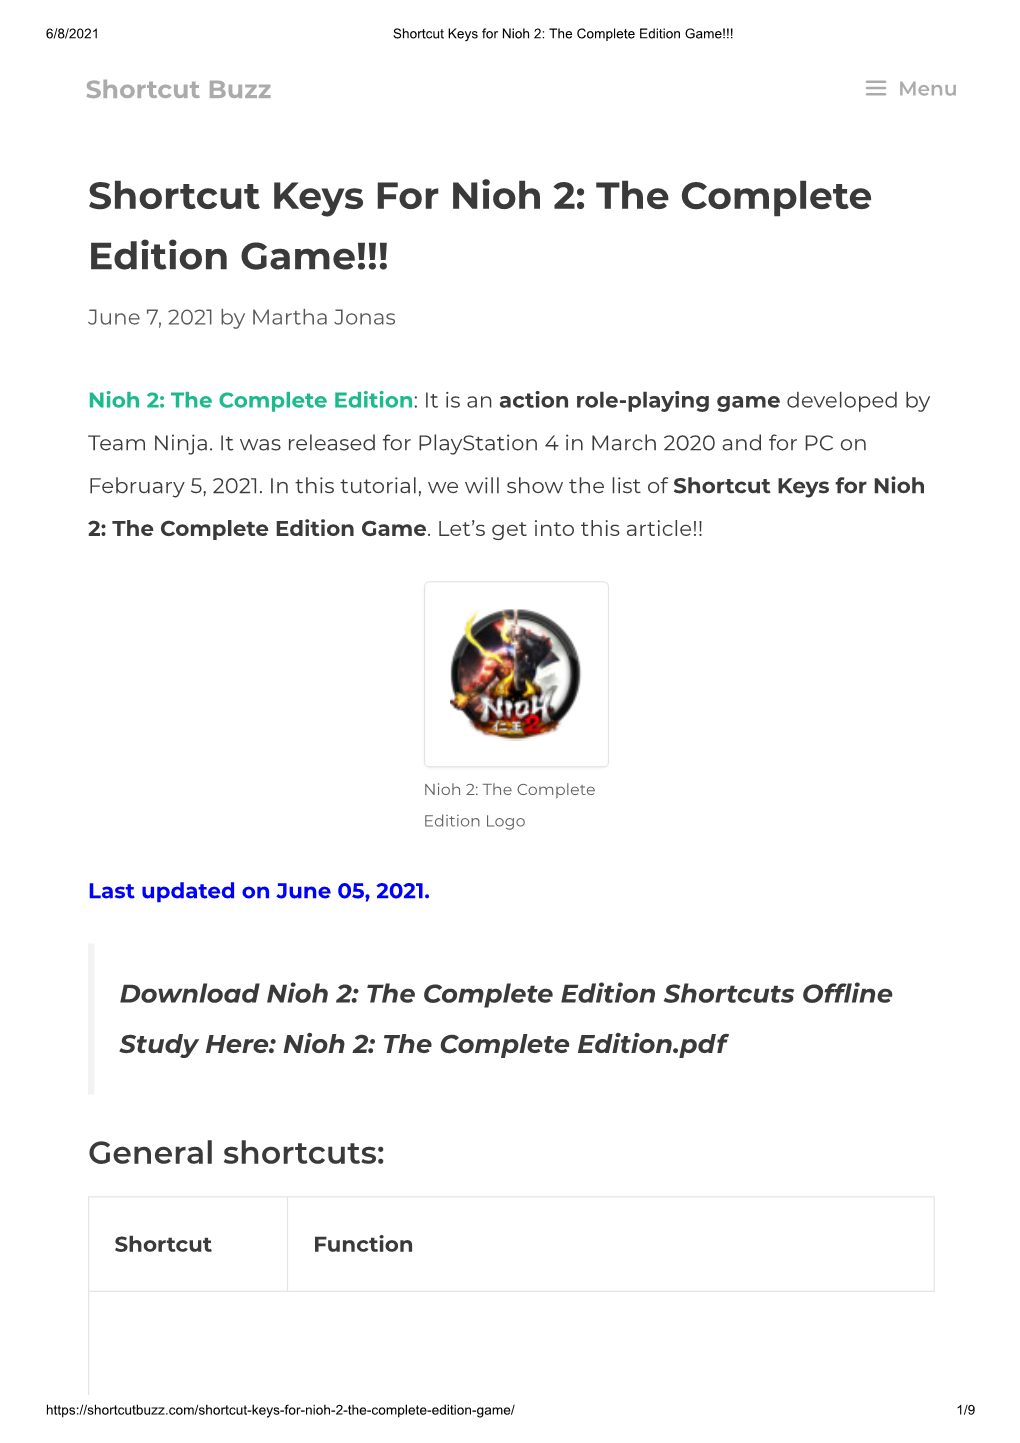 Shortcut Keys for Nioh 2: the Complete Edition Game!!!